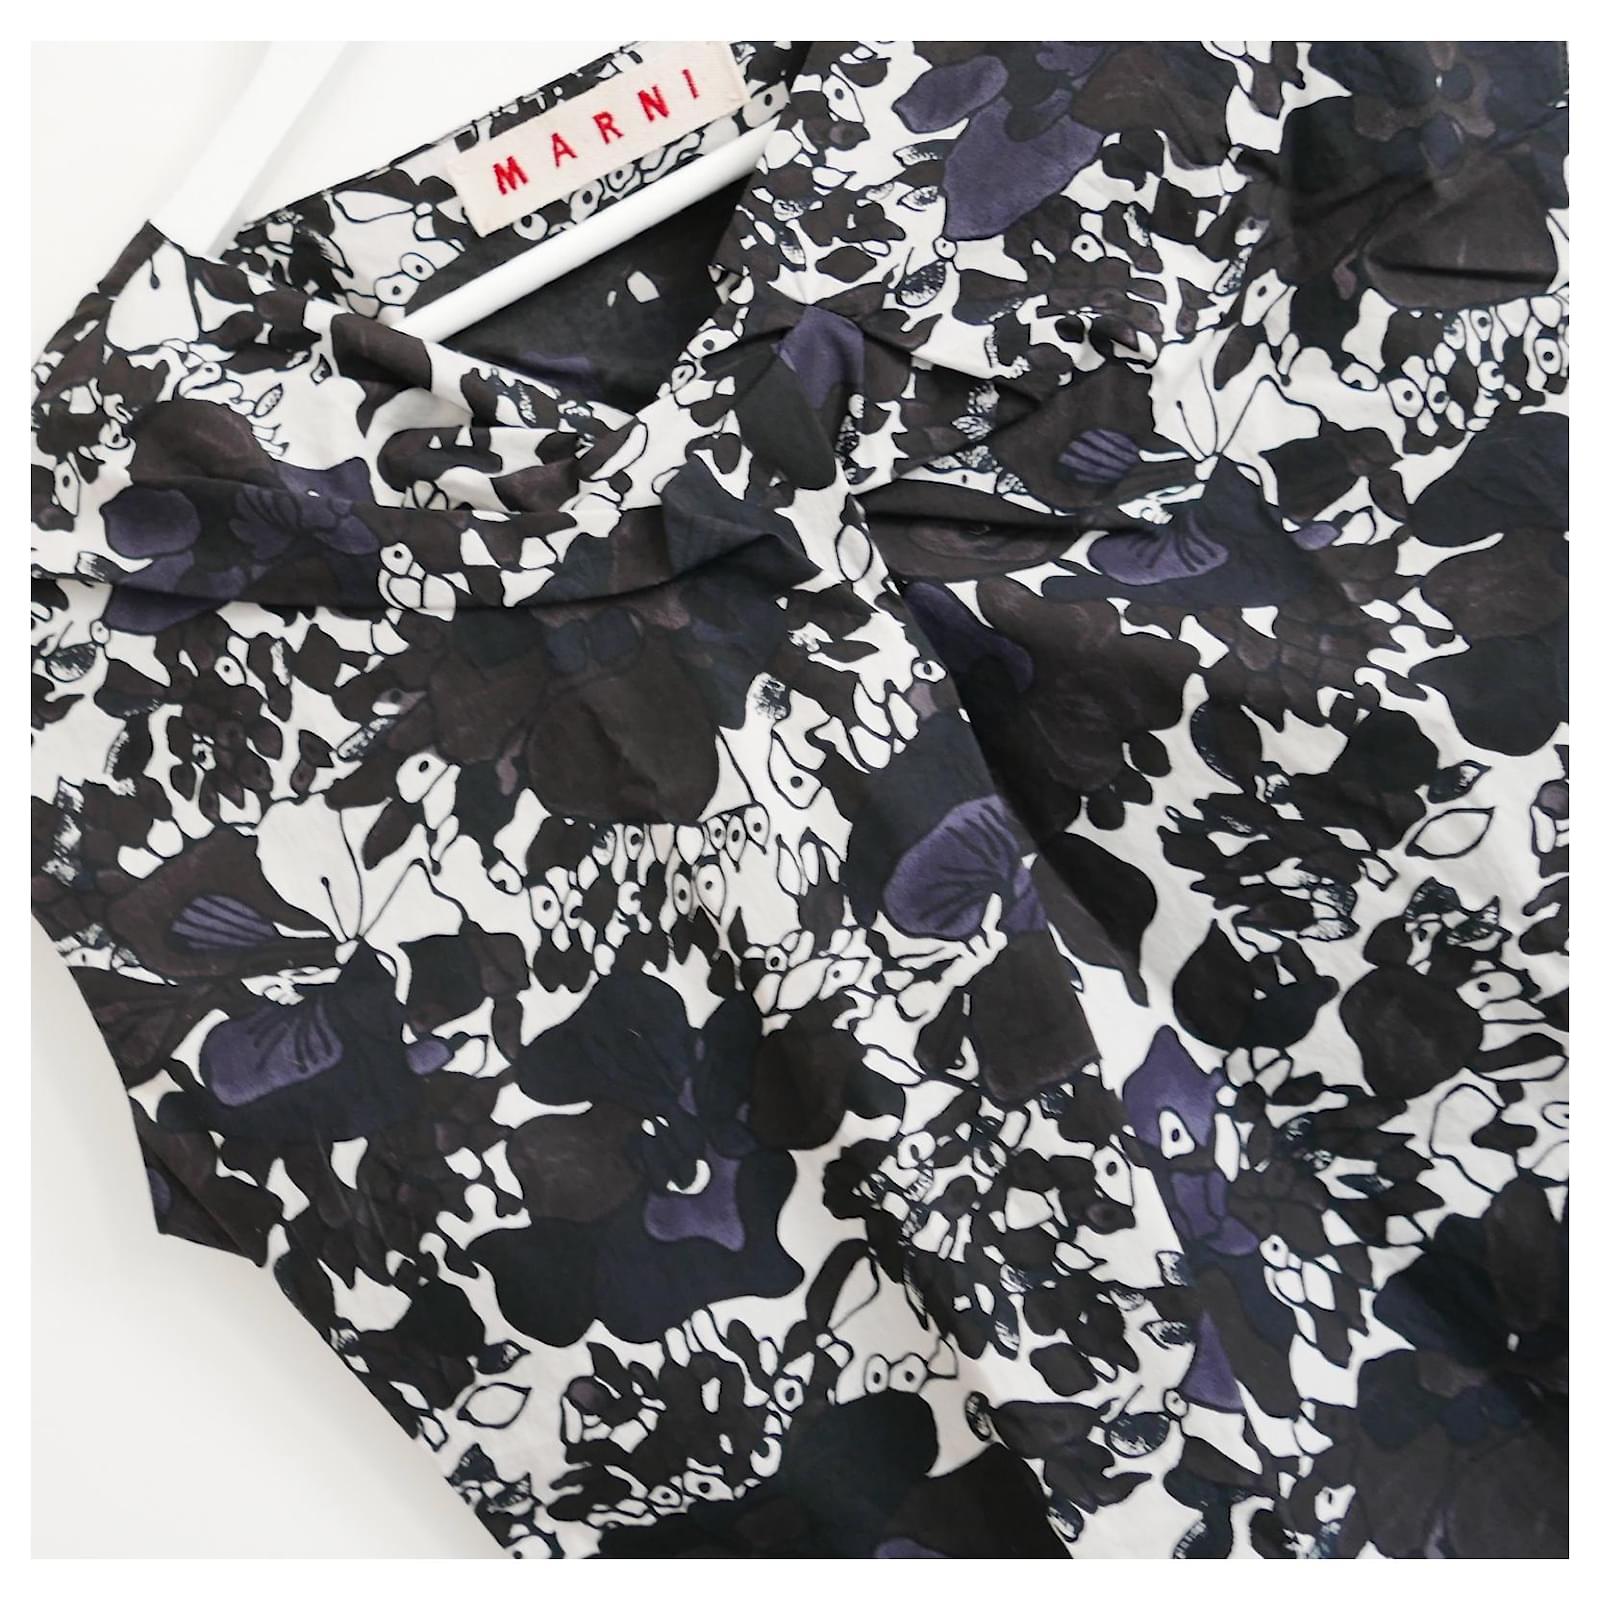 Signature archival Marni top in crisp cotton with black and grey floral print, it has loose fit with tucked neck detail and cap sleeves. Size IT40/UK8. Approx measurements - bust/waist 34” and length 23”.
